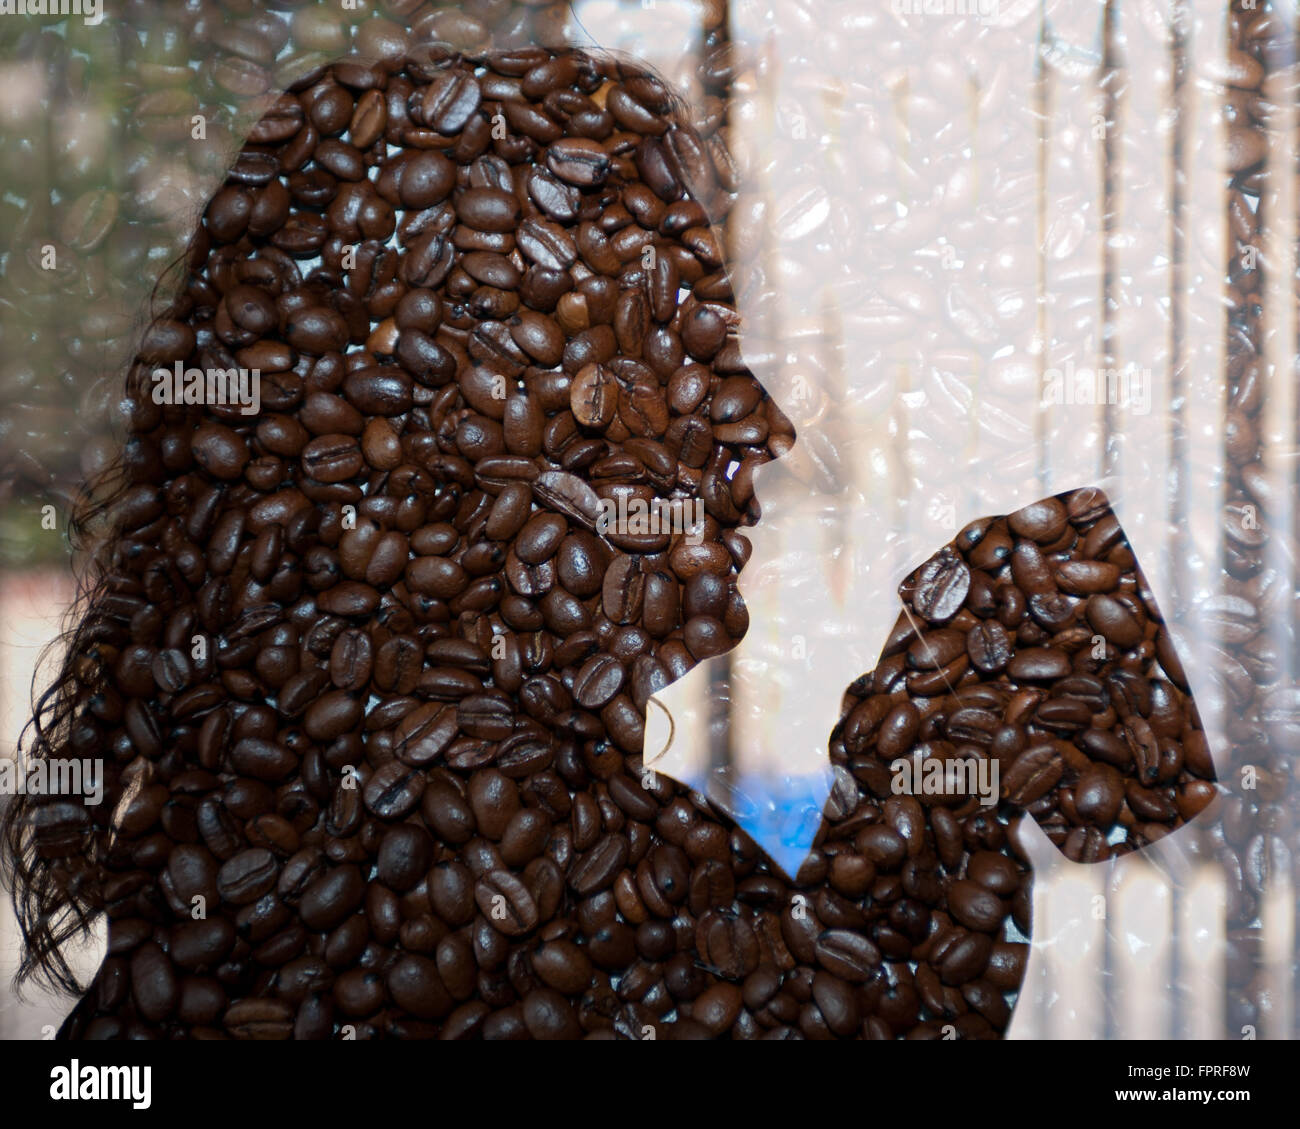 Coffee bean texture over silhouette Stock Photo